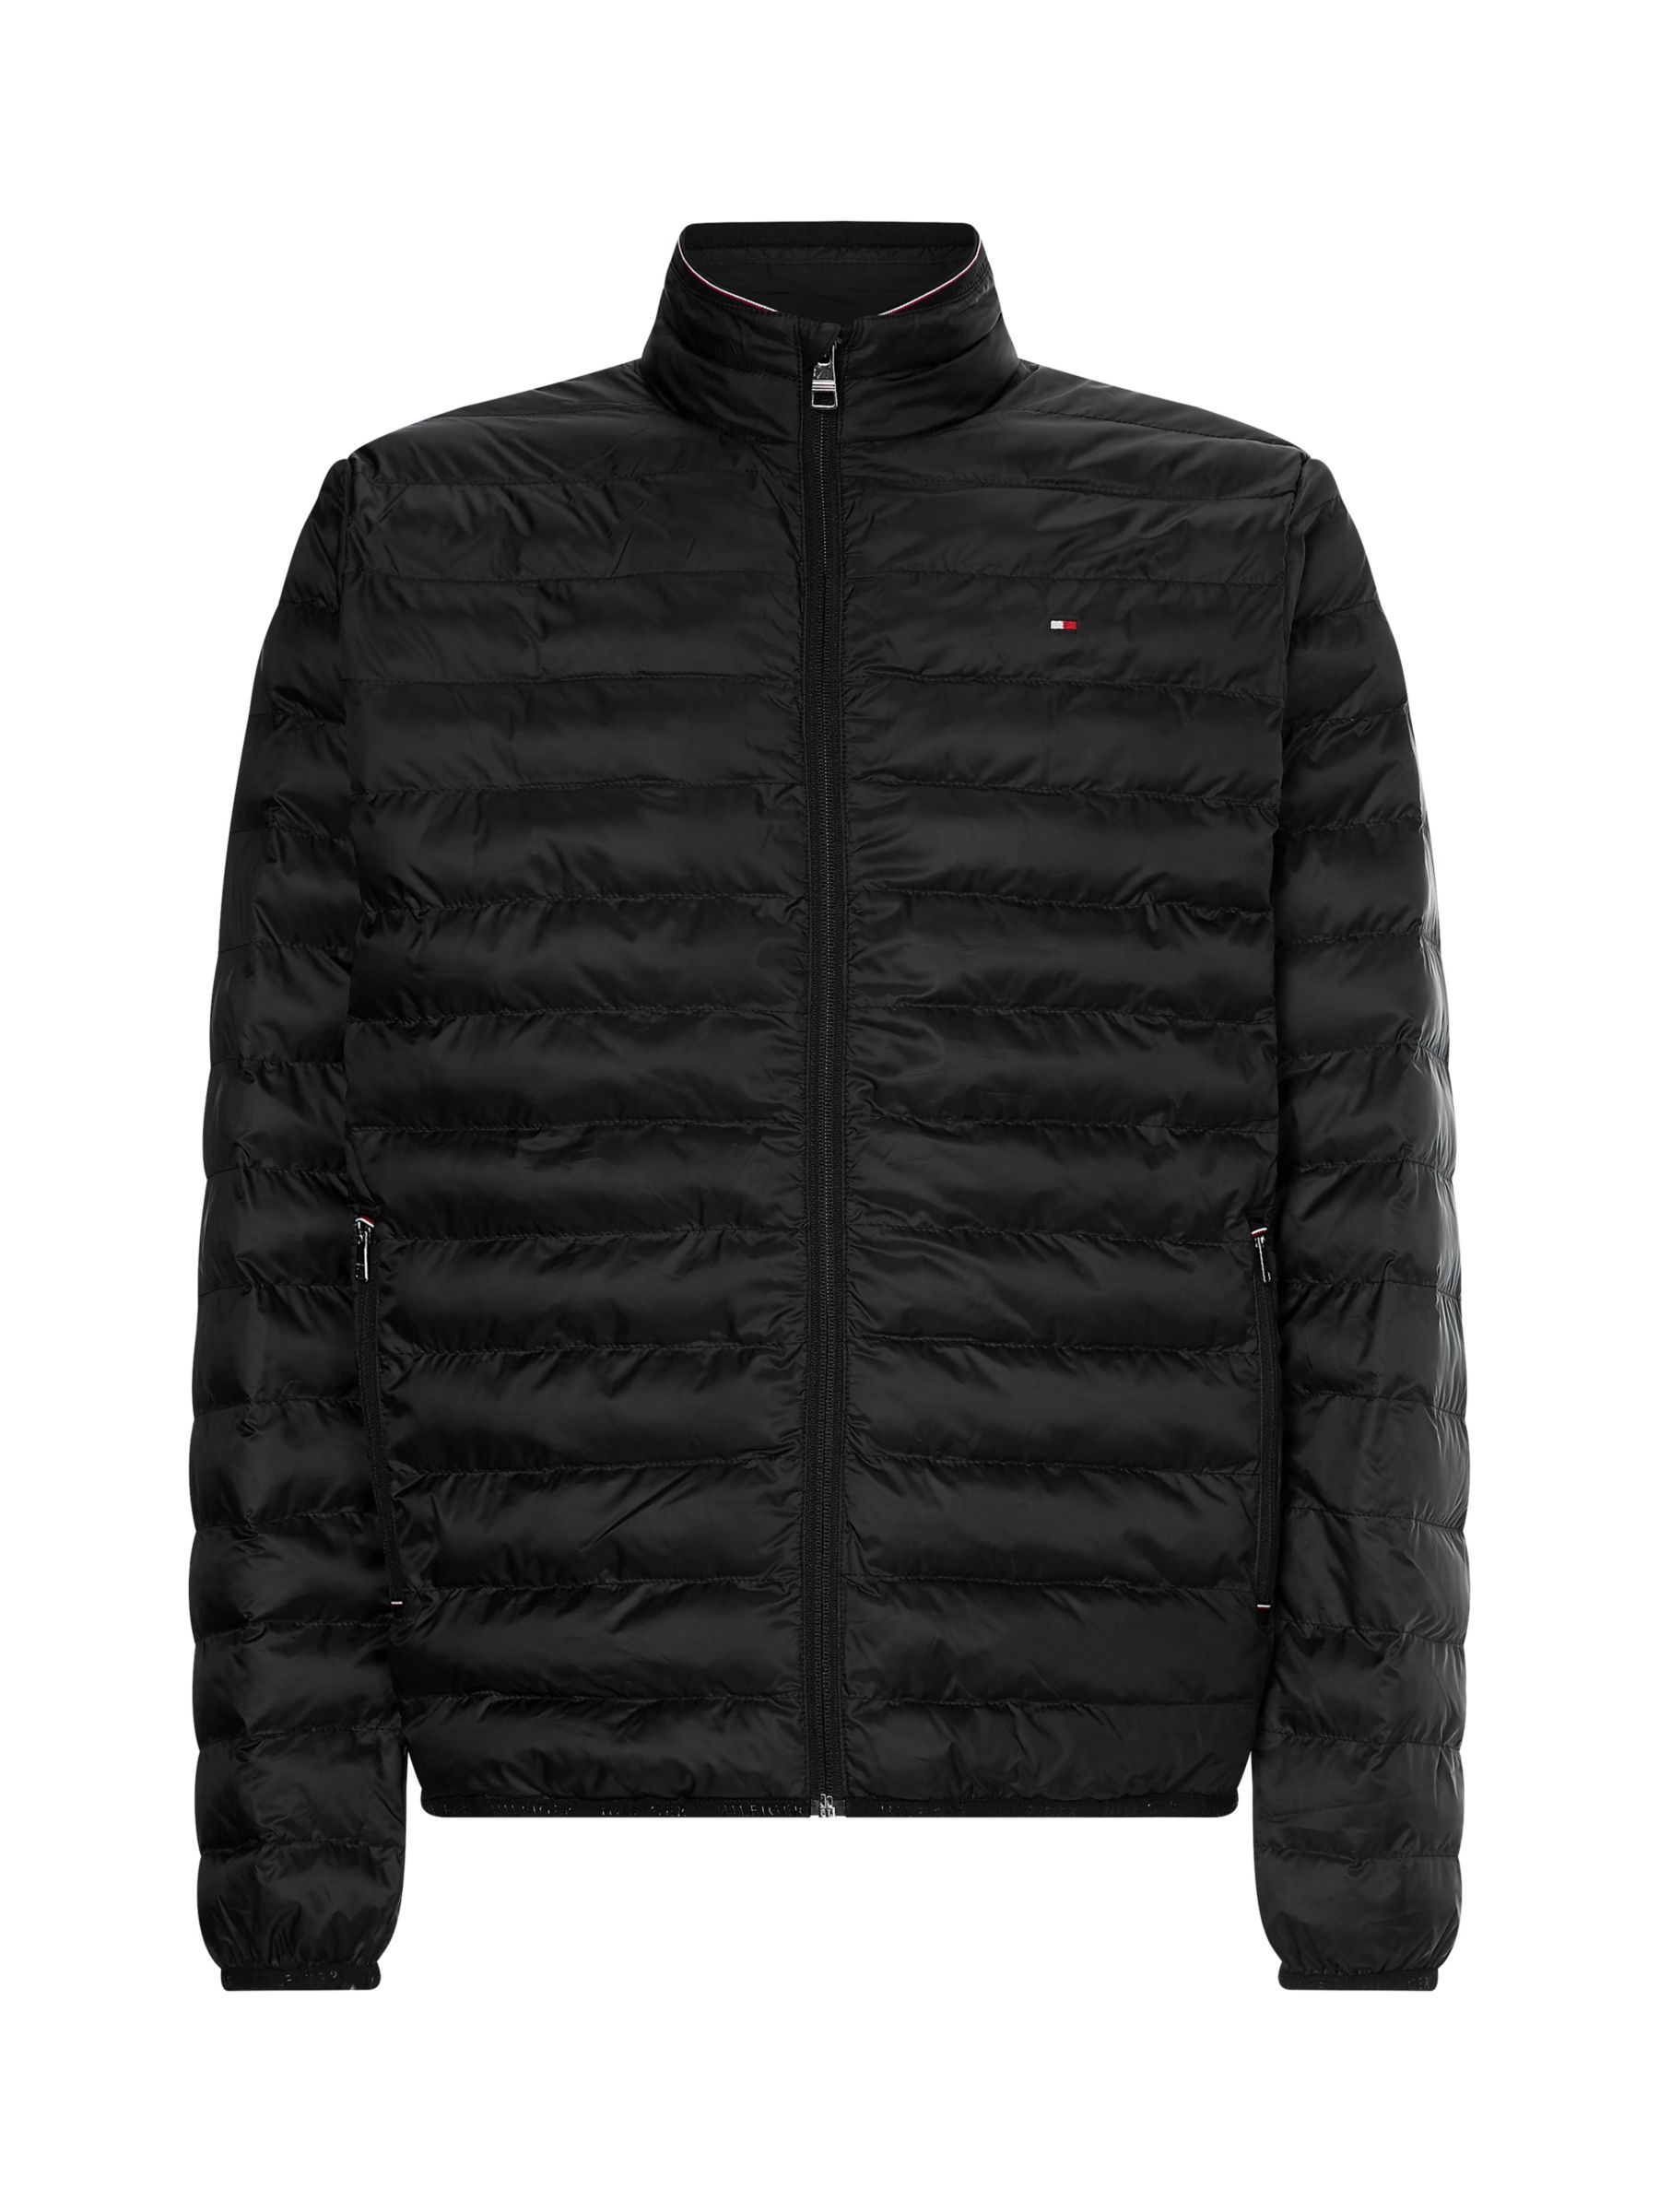 Tommy Hilfiger Packable Down Quilted Jacket, Black at John Lewis & Partners